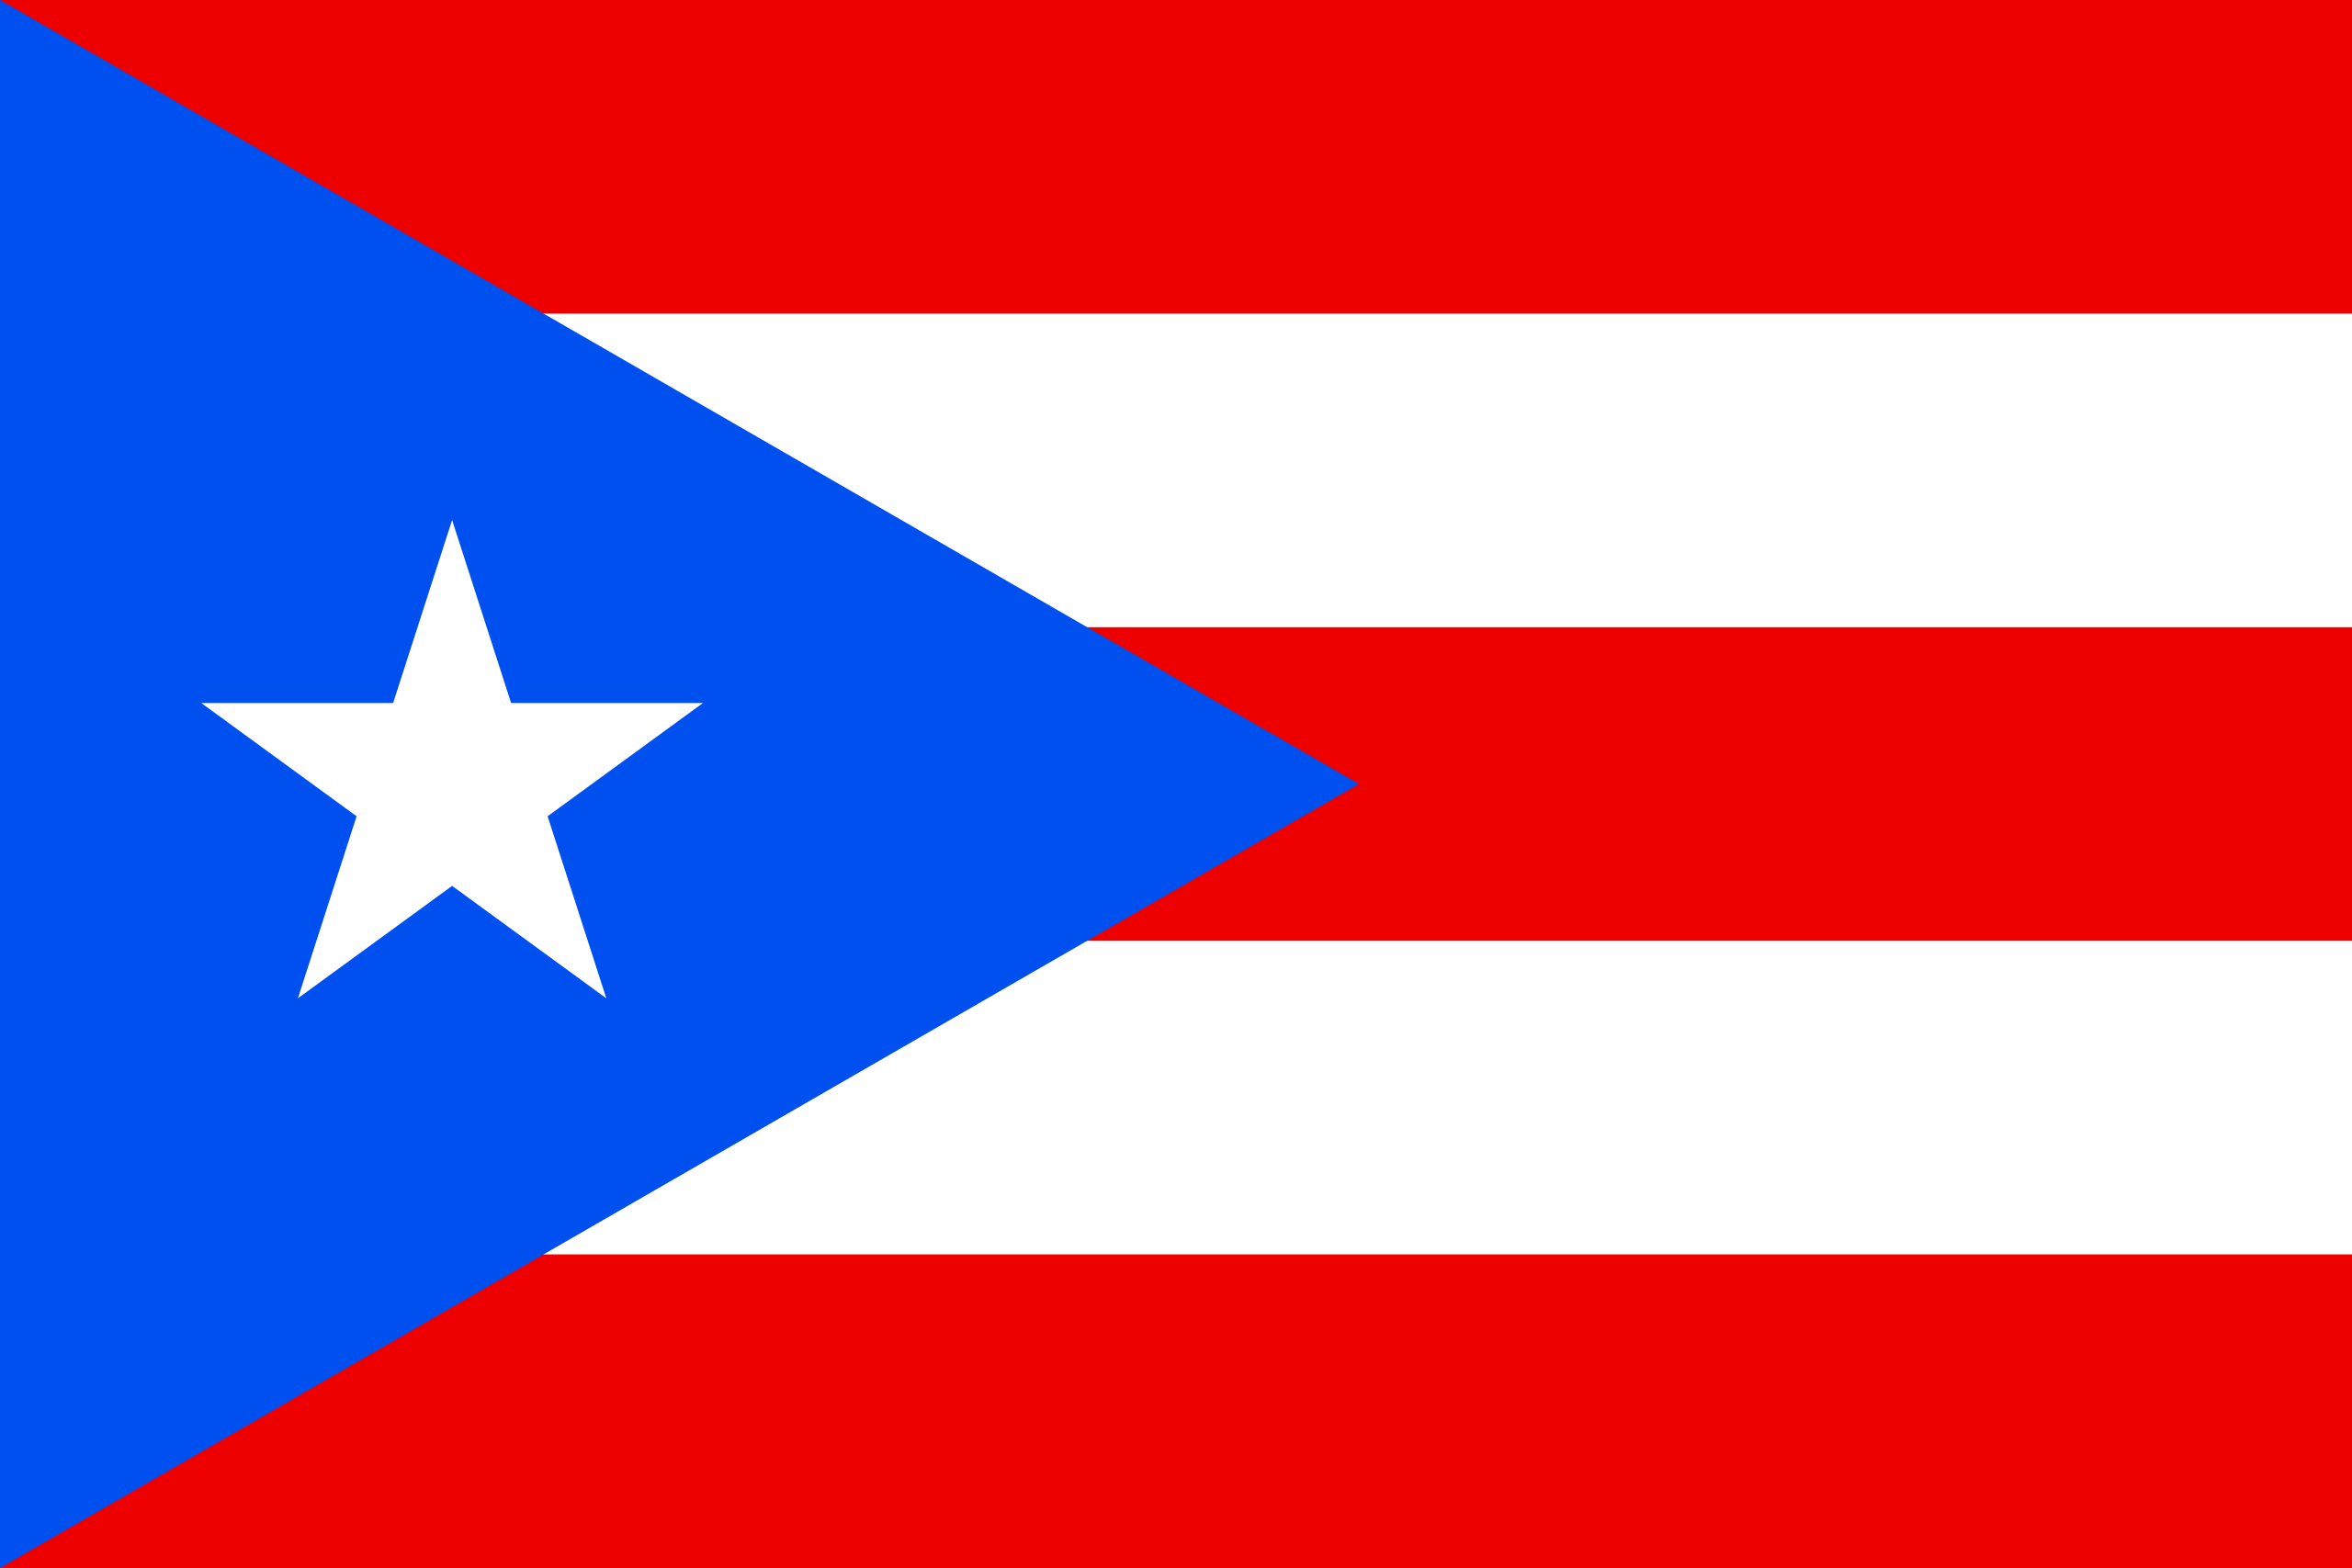 File:Puerto Rican flag.png